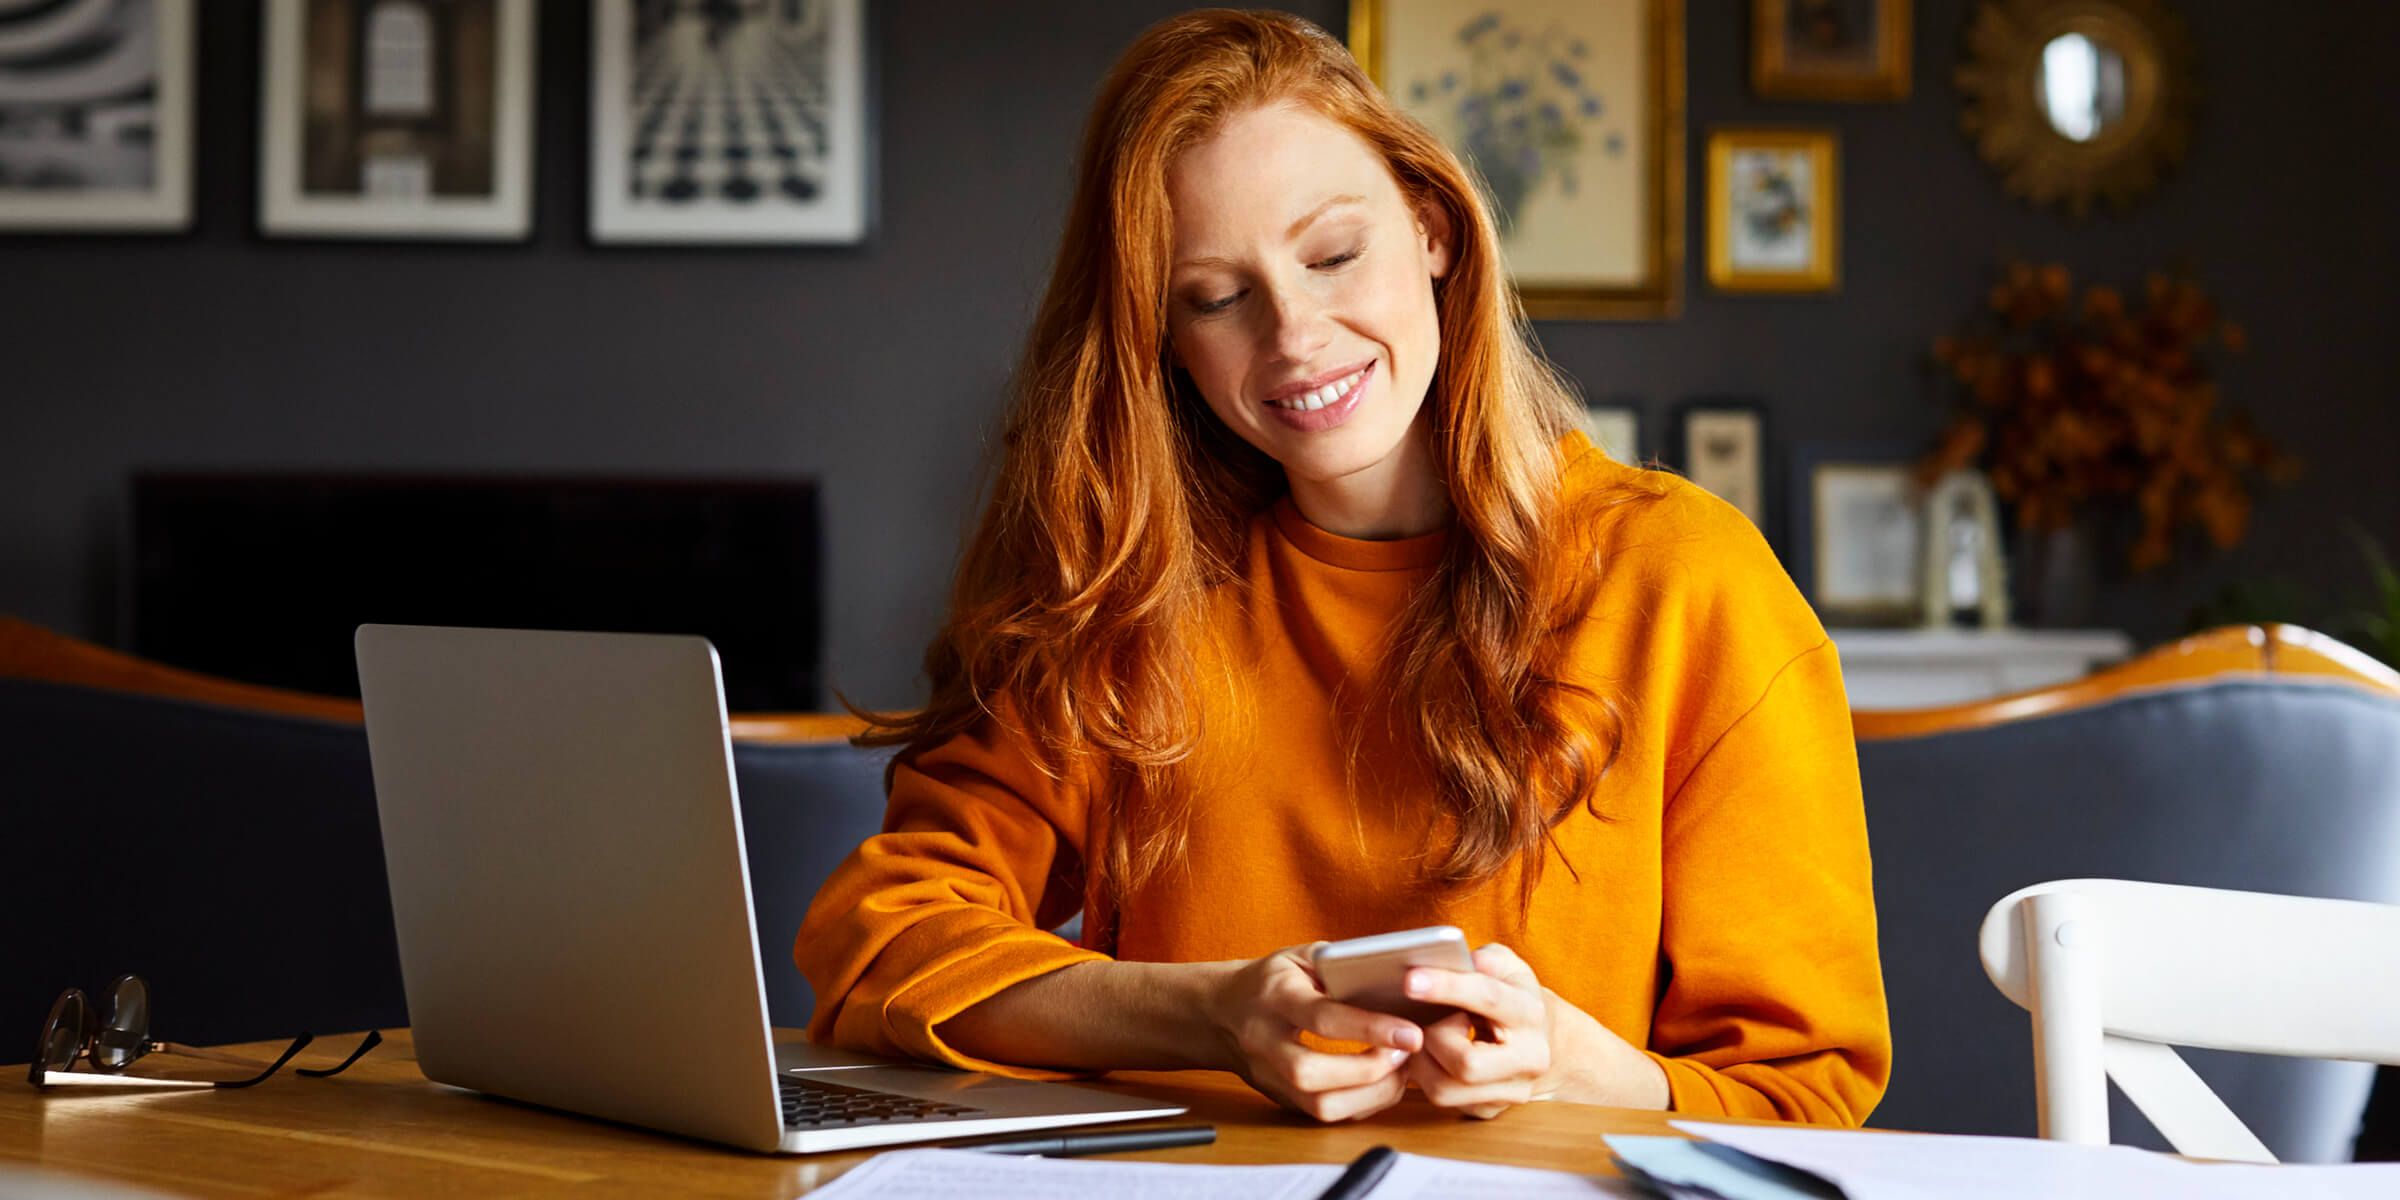 red headed lady sitting at table with laptop looking at phone 